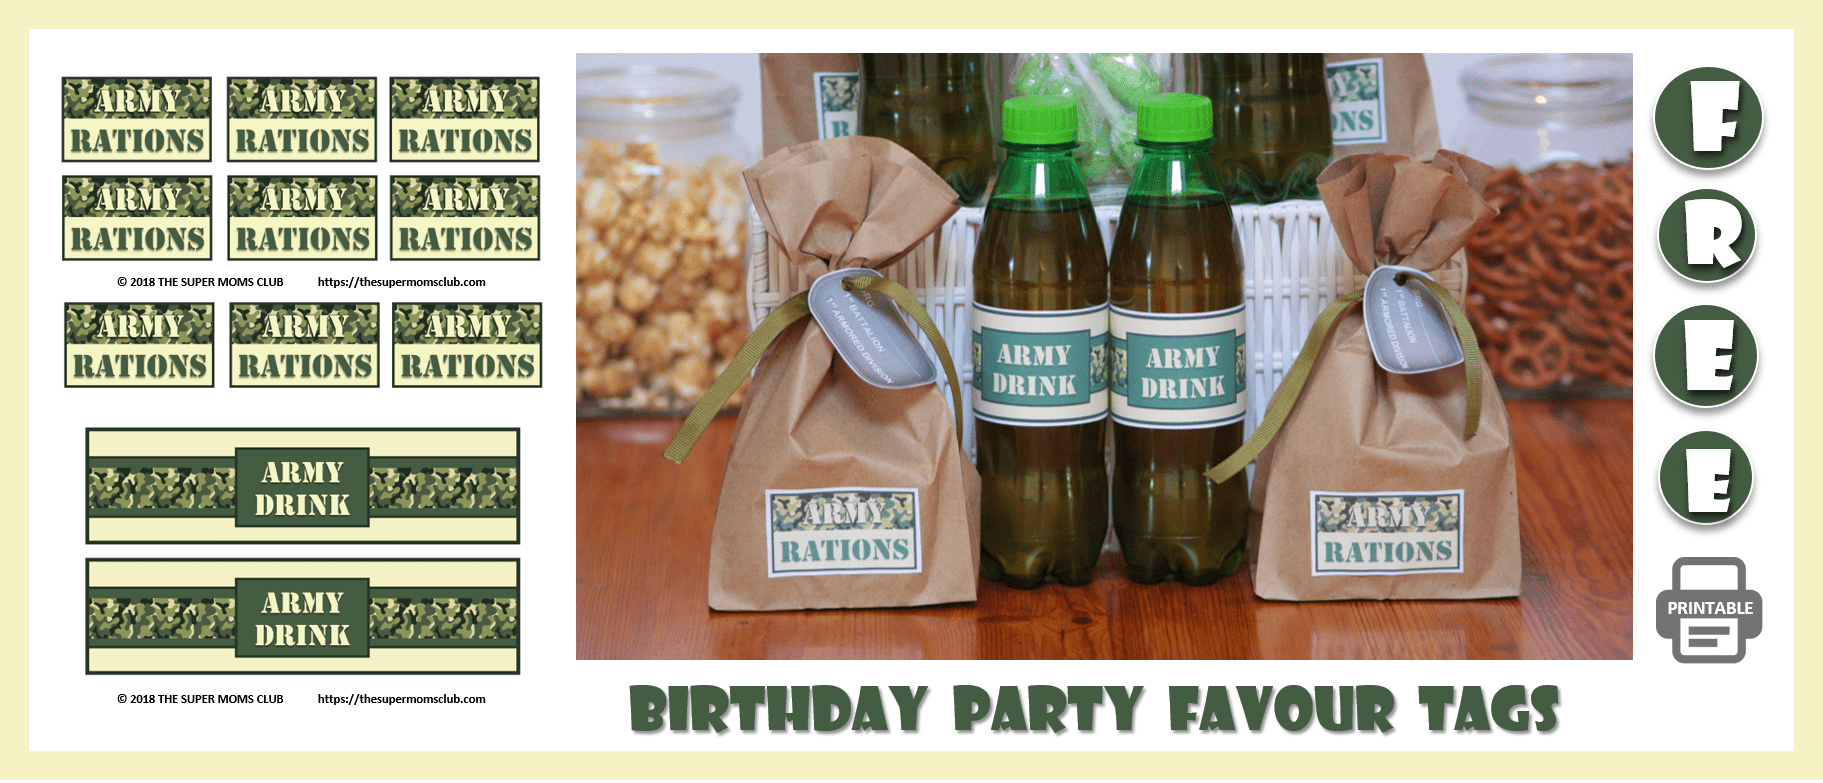 Army Themed Bithday Party FREE PRINTABLE Favour Tags - The Super Moms Club